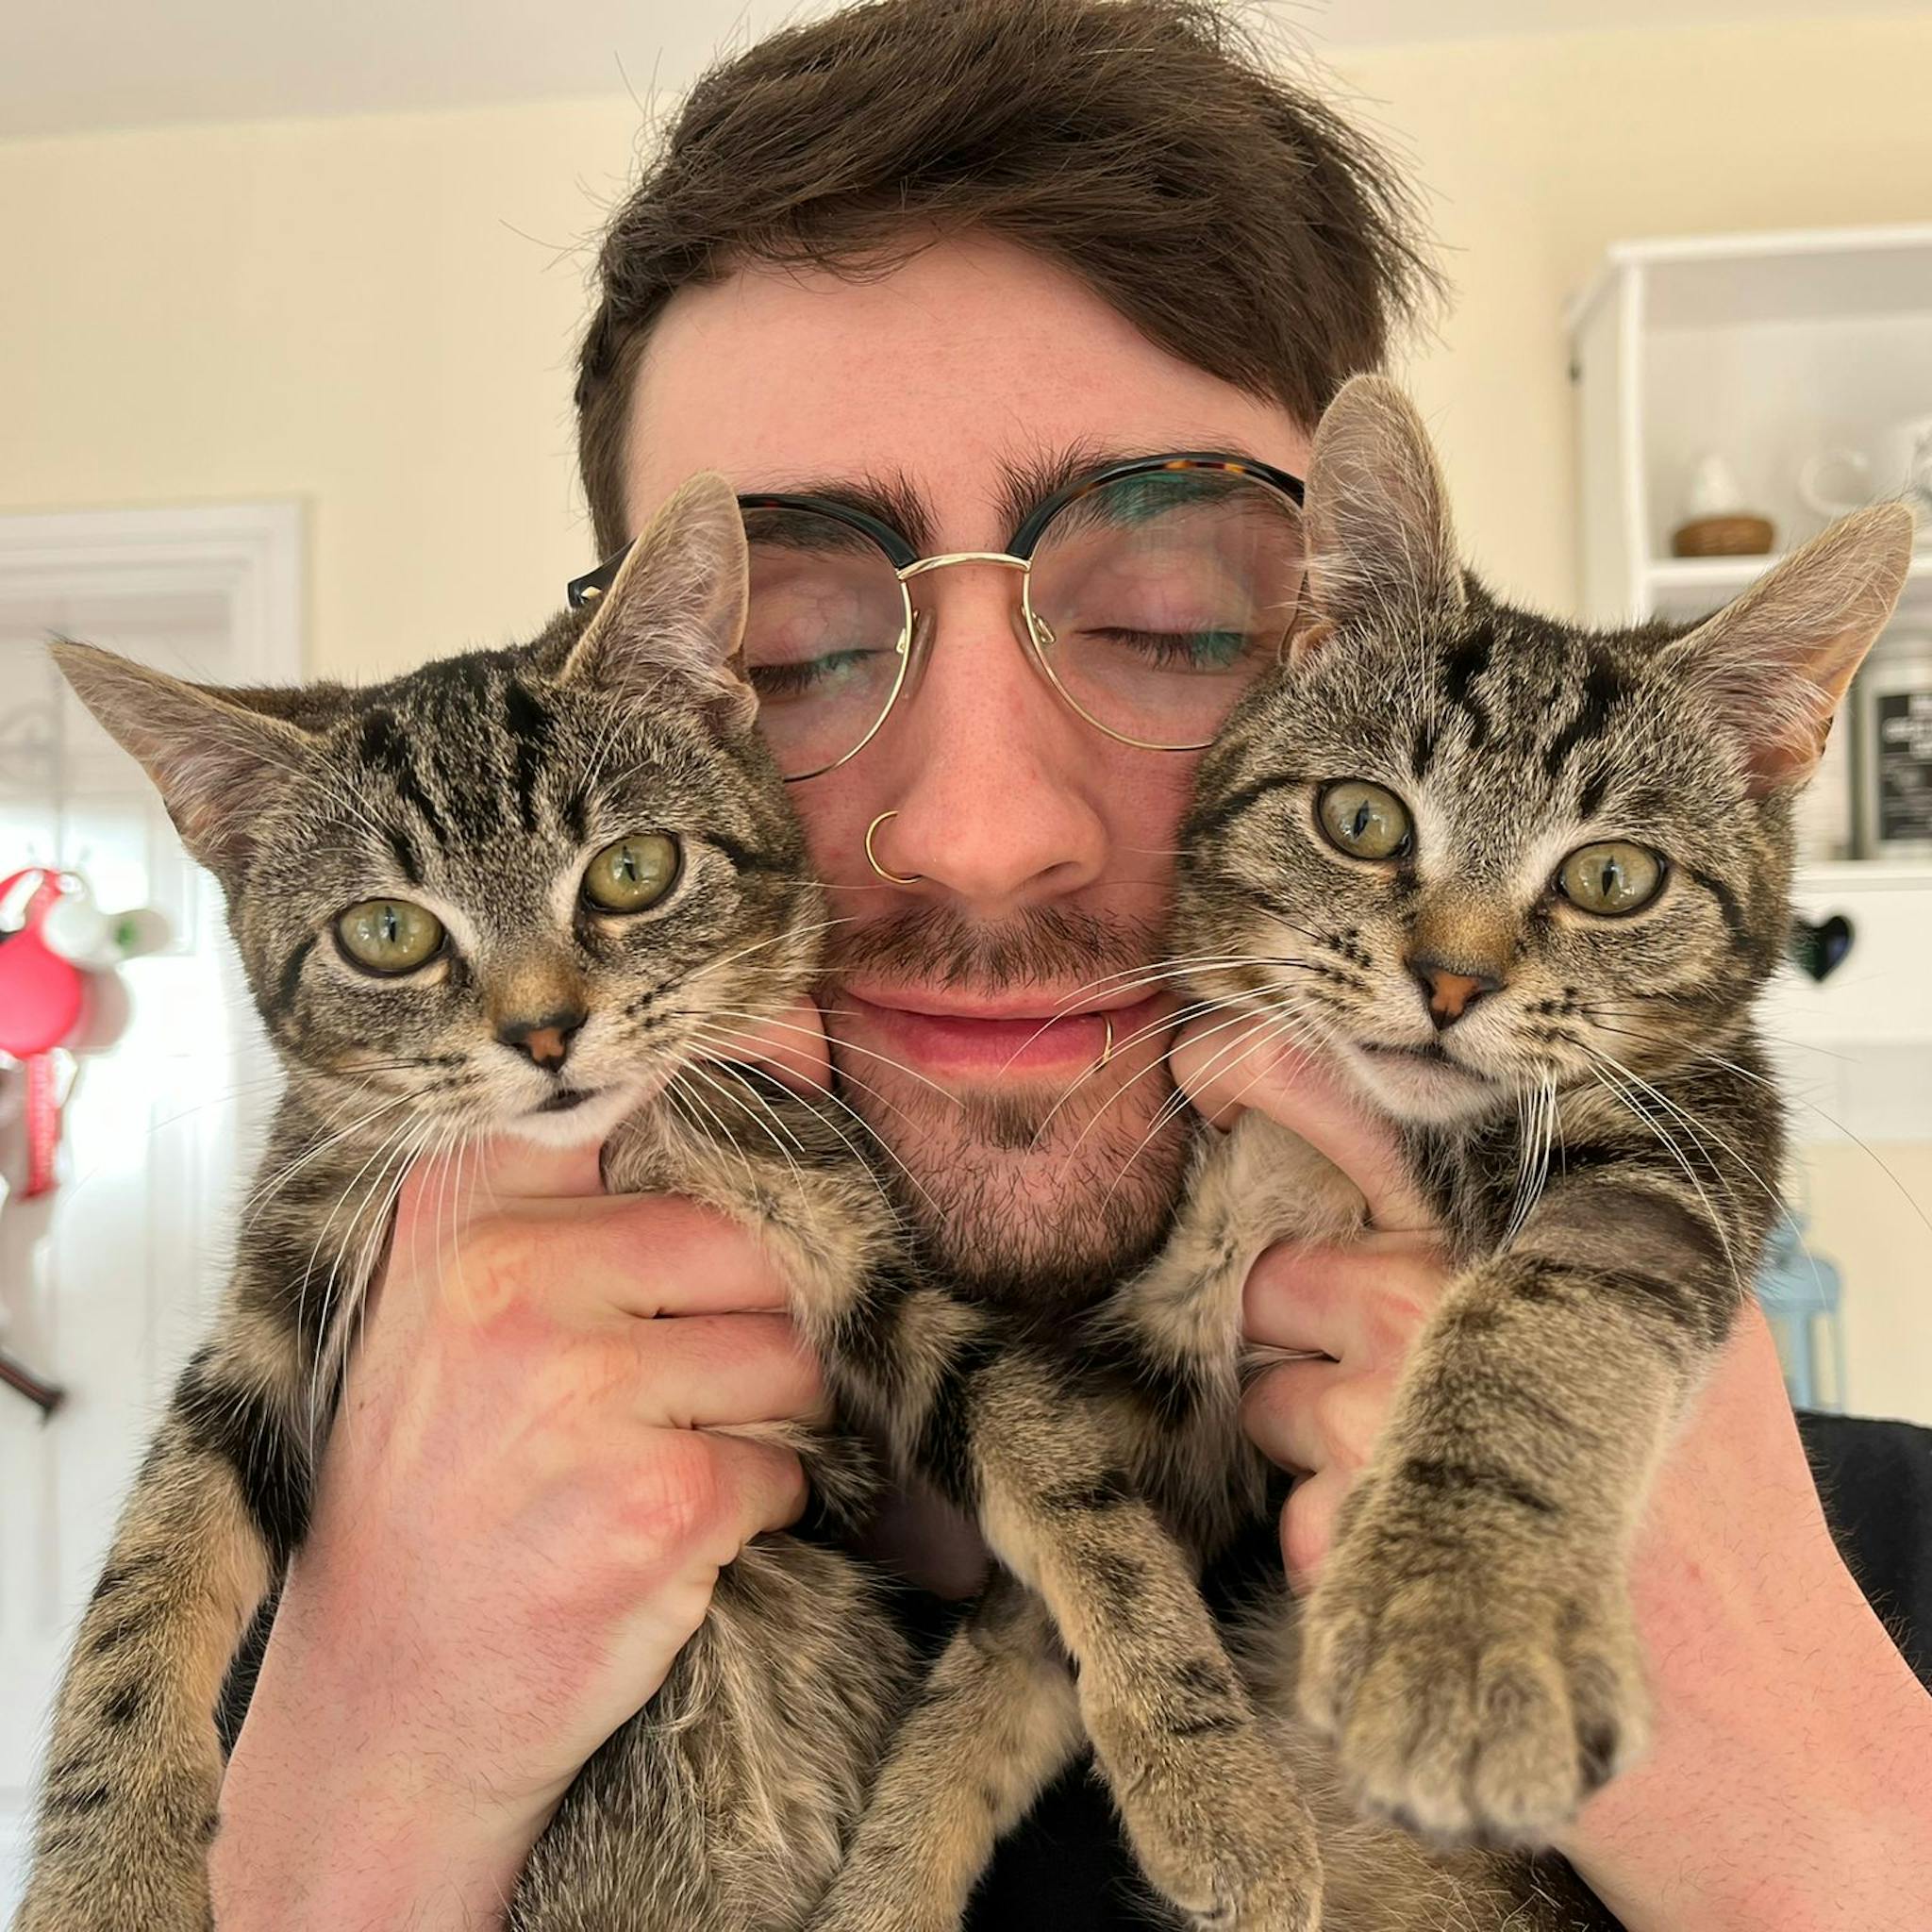 Me holding my two kittens, Jaskier and Cirilla